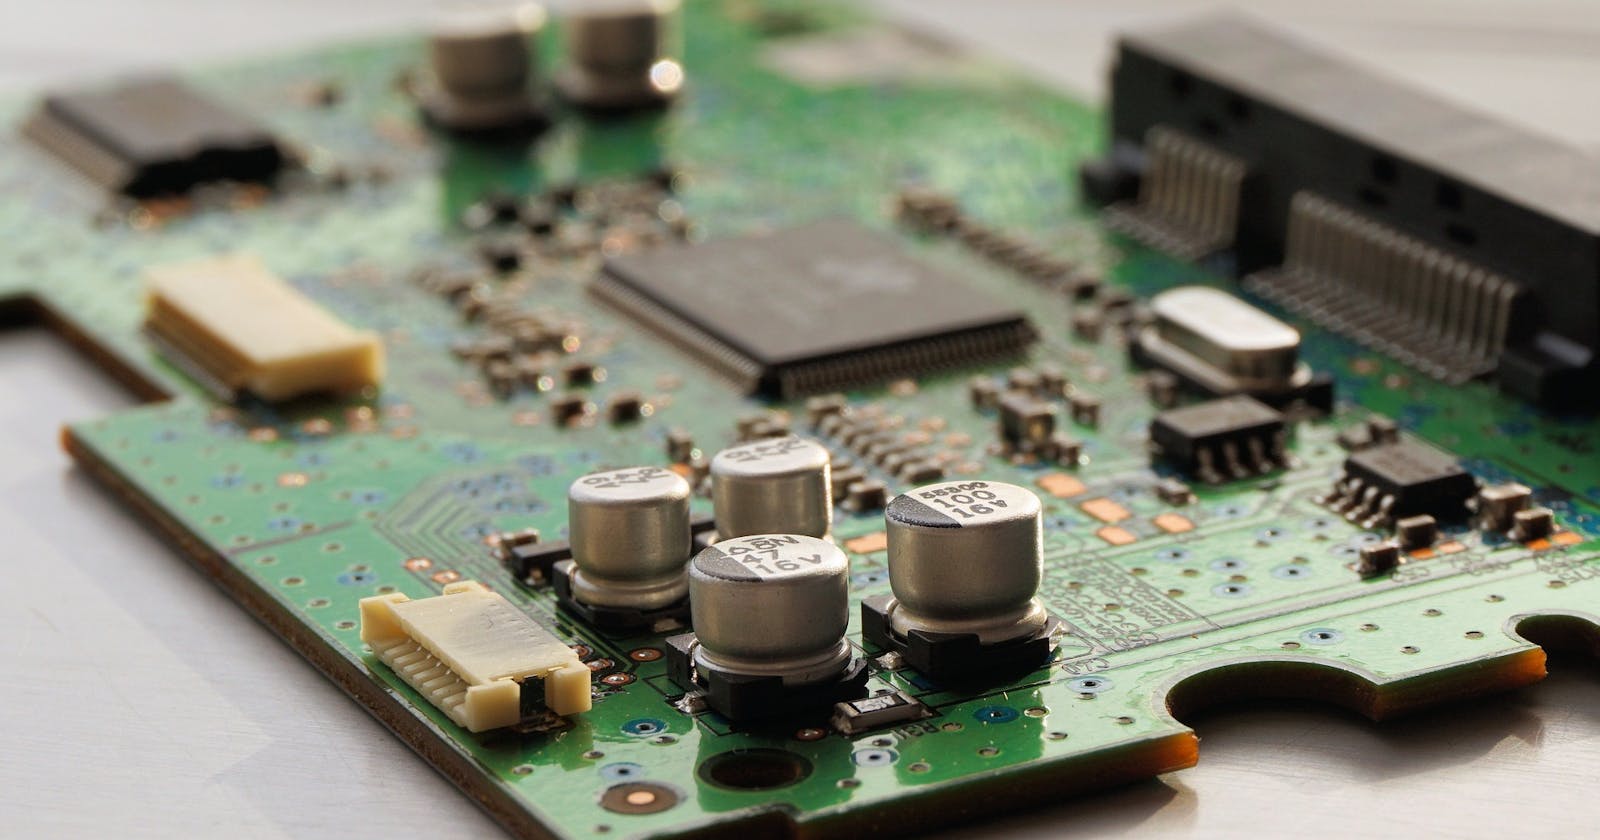 How to Self-Learn Embedded Systems in 2021